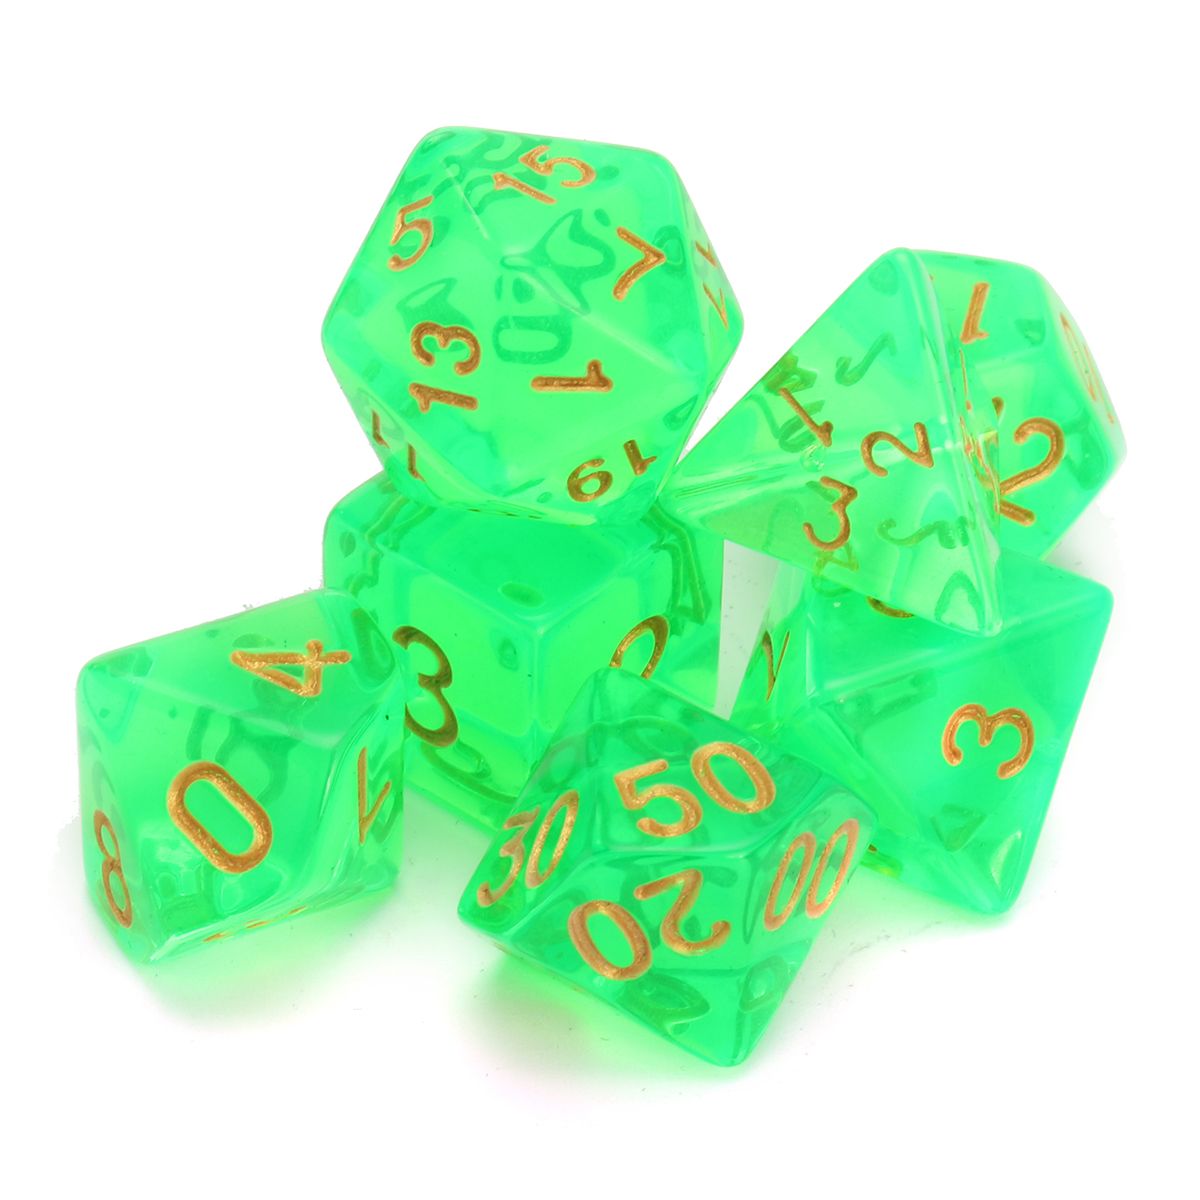 Polyhedral-Dice-with-Bag-Light-Green-7-Piece-Set-DnD-RPG-1218078